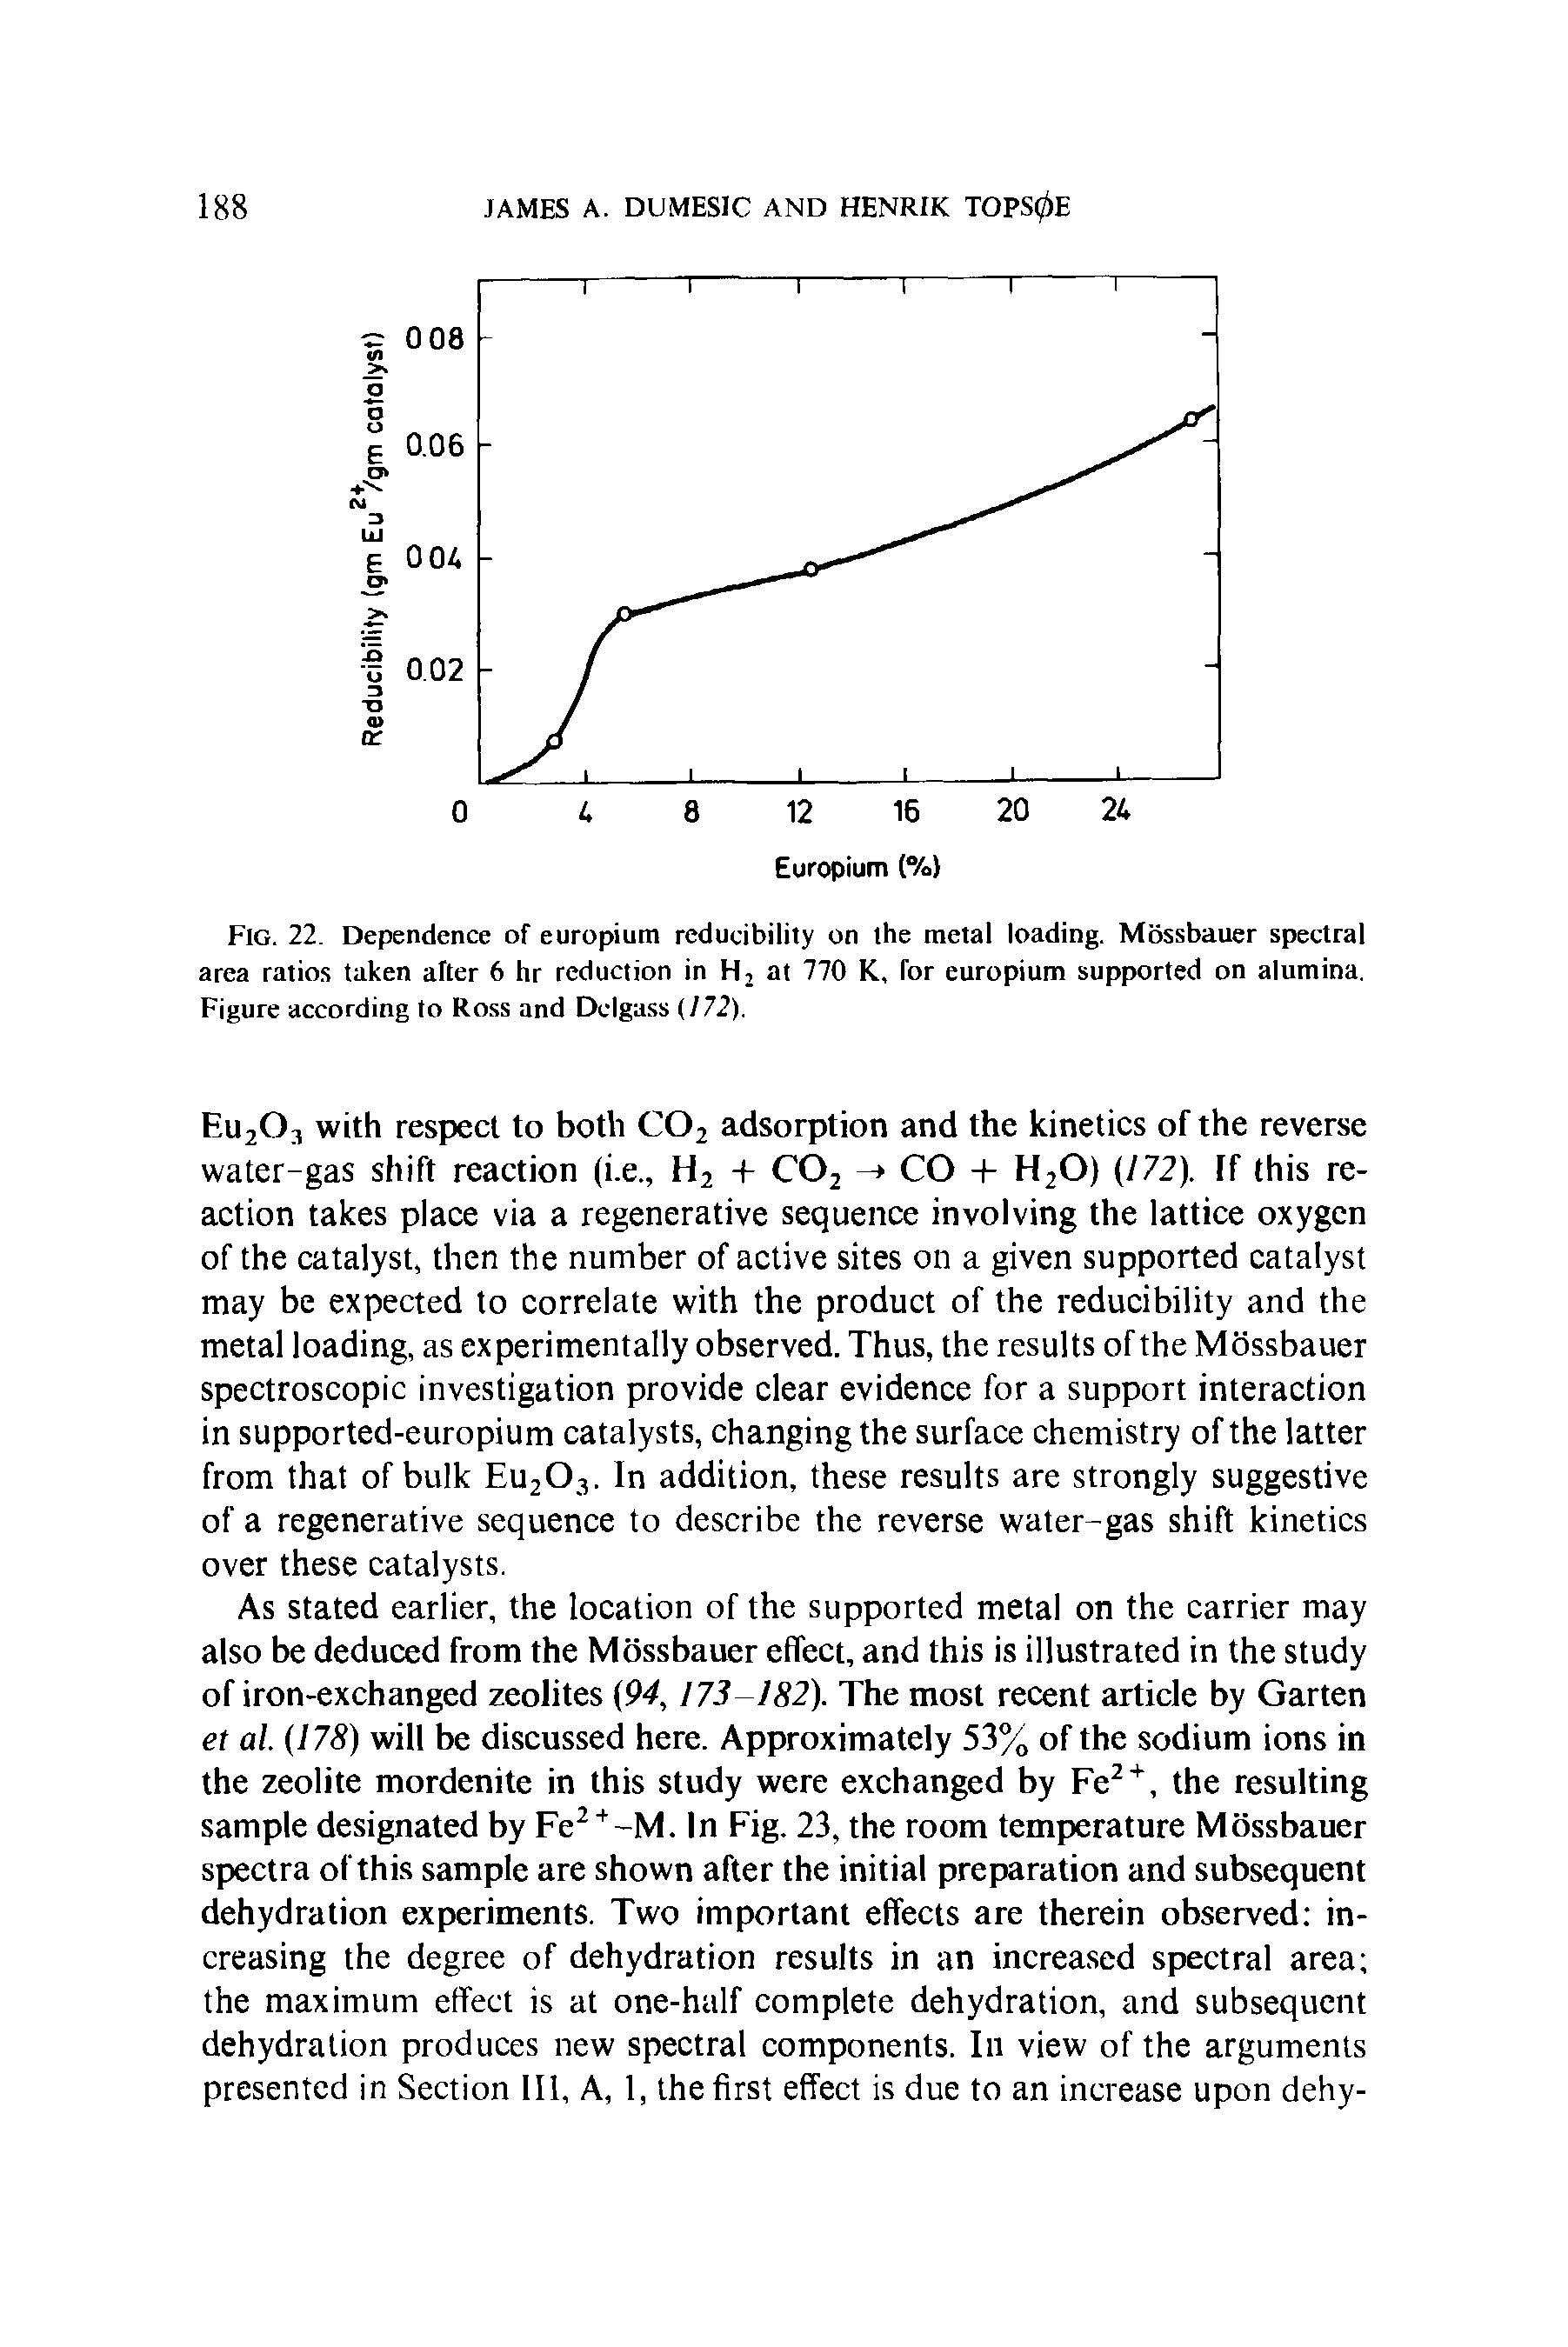 Fig. 22. Dependence of europium reducibility on the metal loading. Mossbauer spectral area ratios taken after 6 hr reduction in H2 at 770 K, for europium supported on alumina. Figure according to Ross and Dclgass (172).